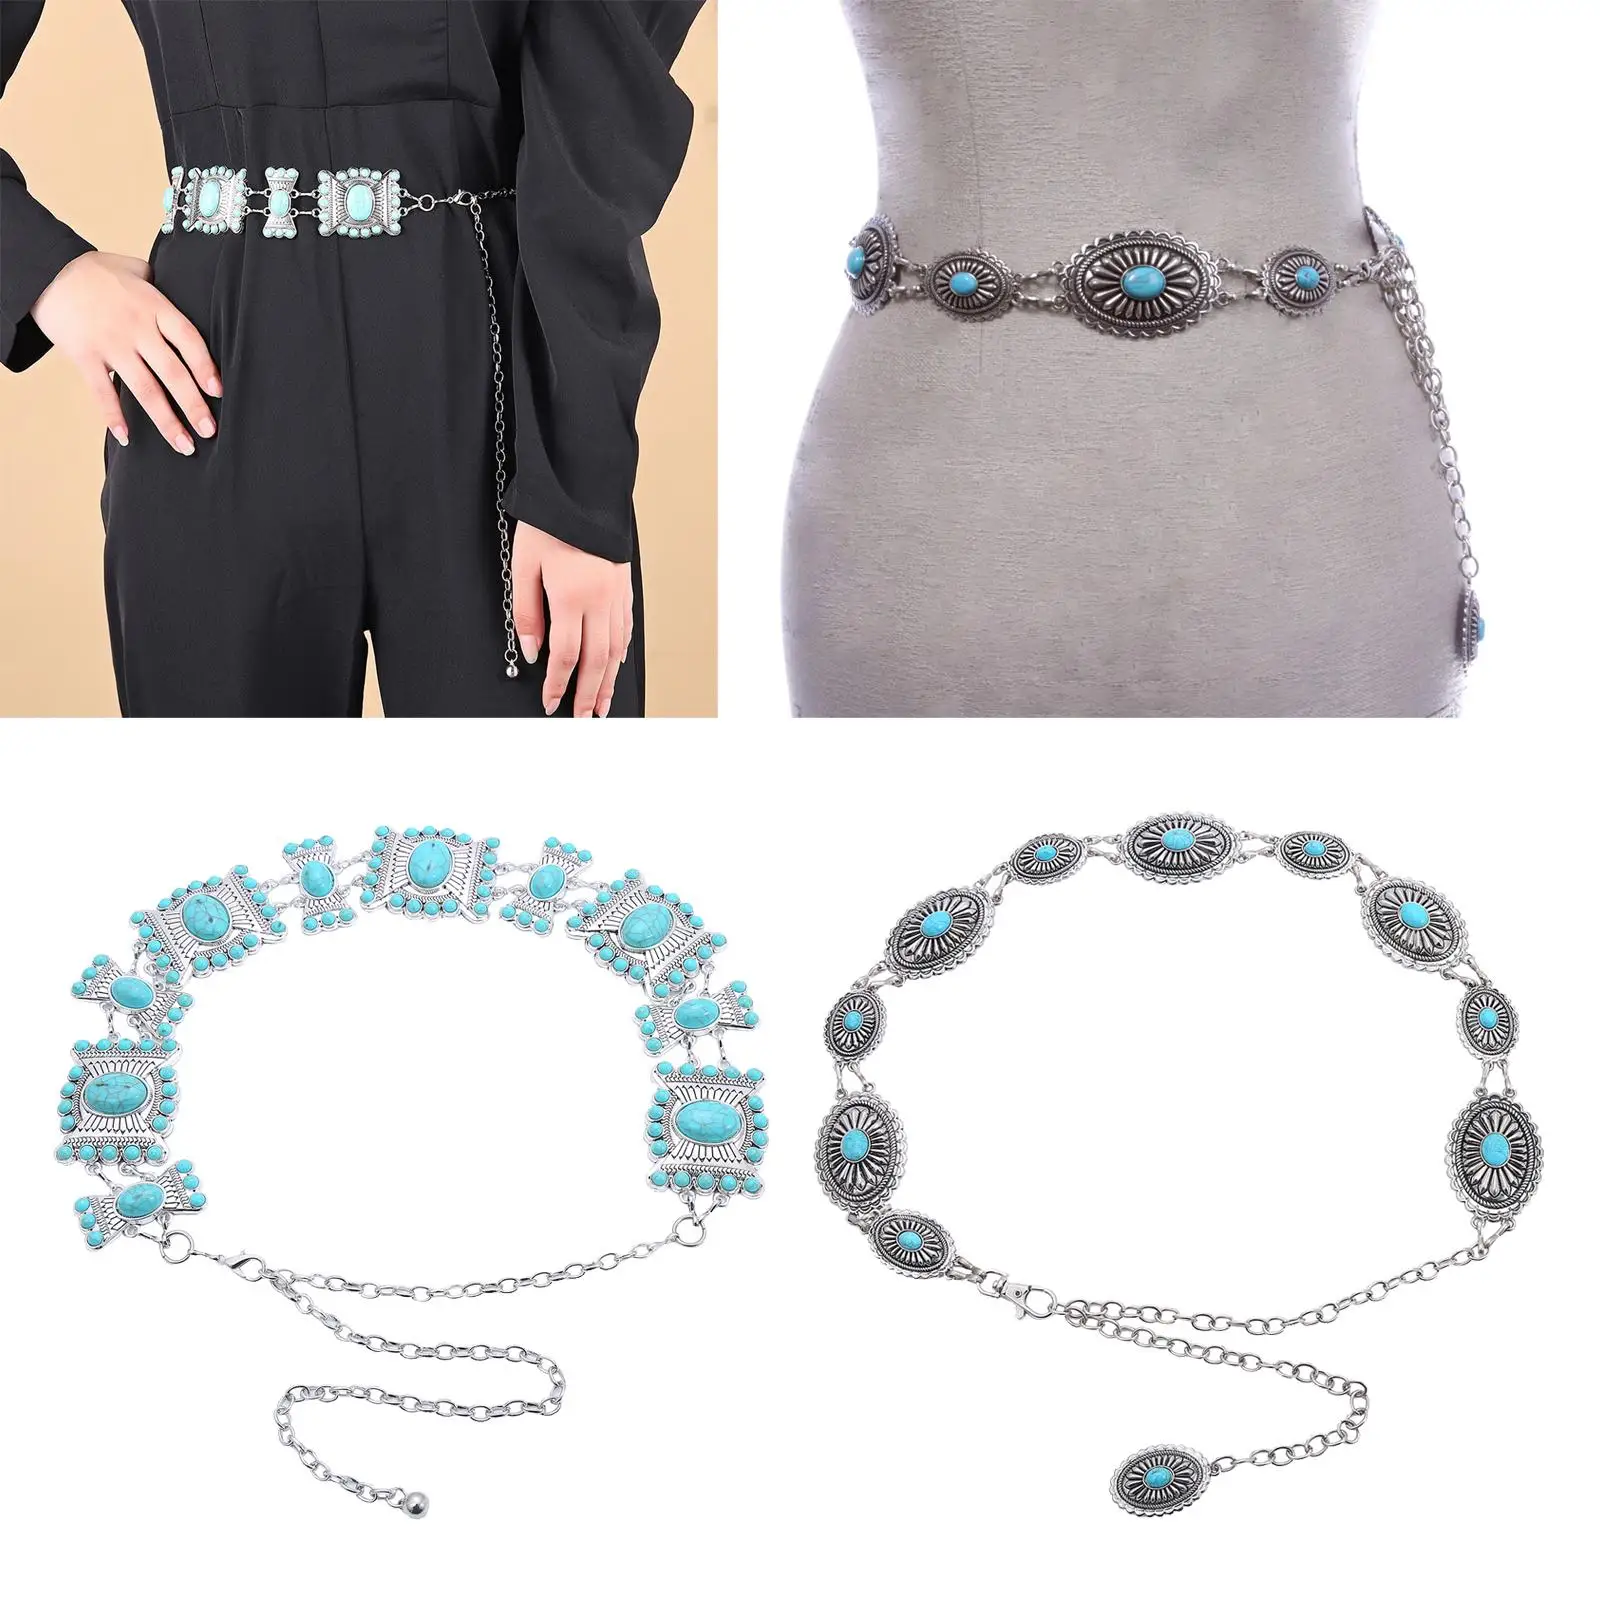 Turquoise Chain Belt Waistband Beach Costume Accessory Belly Body Chain